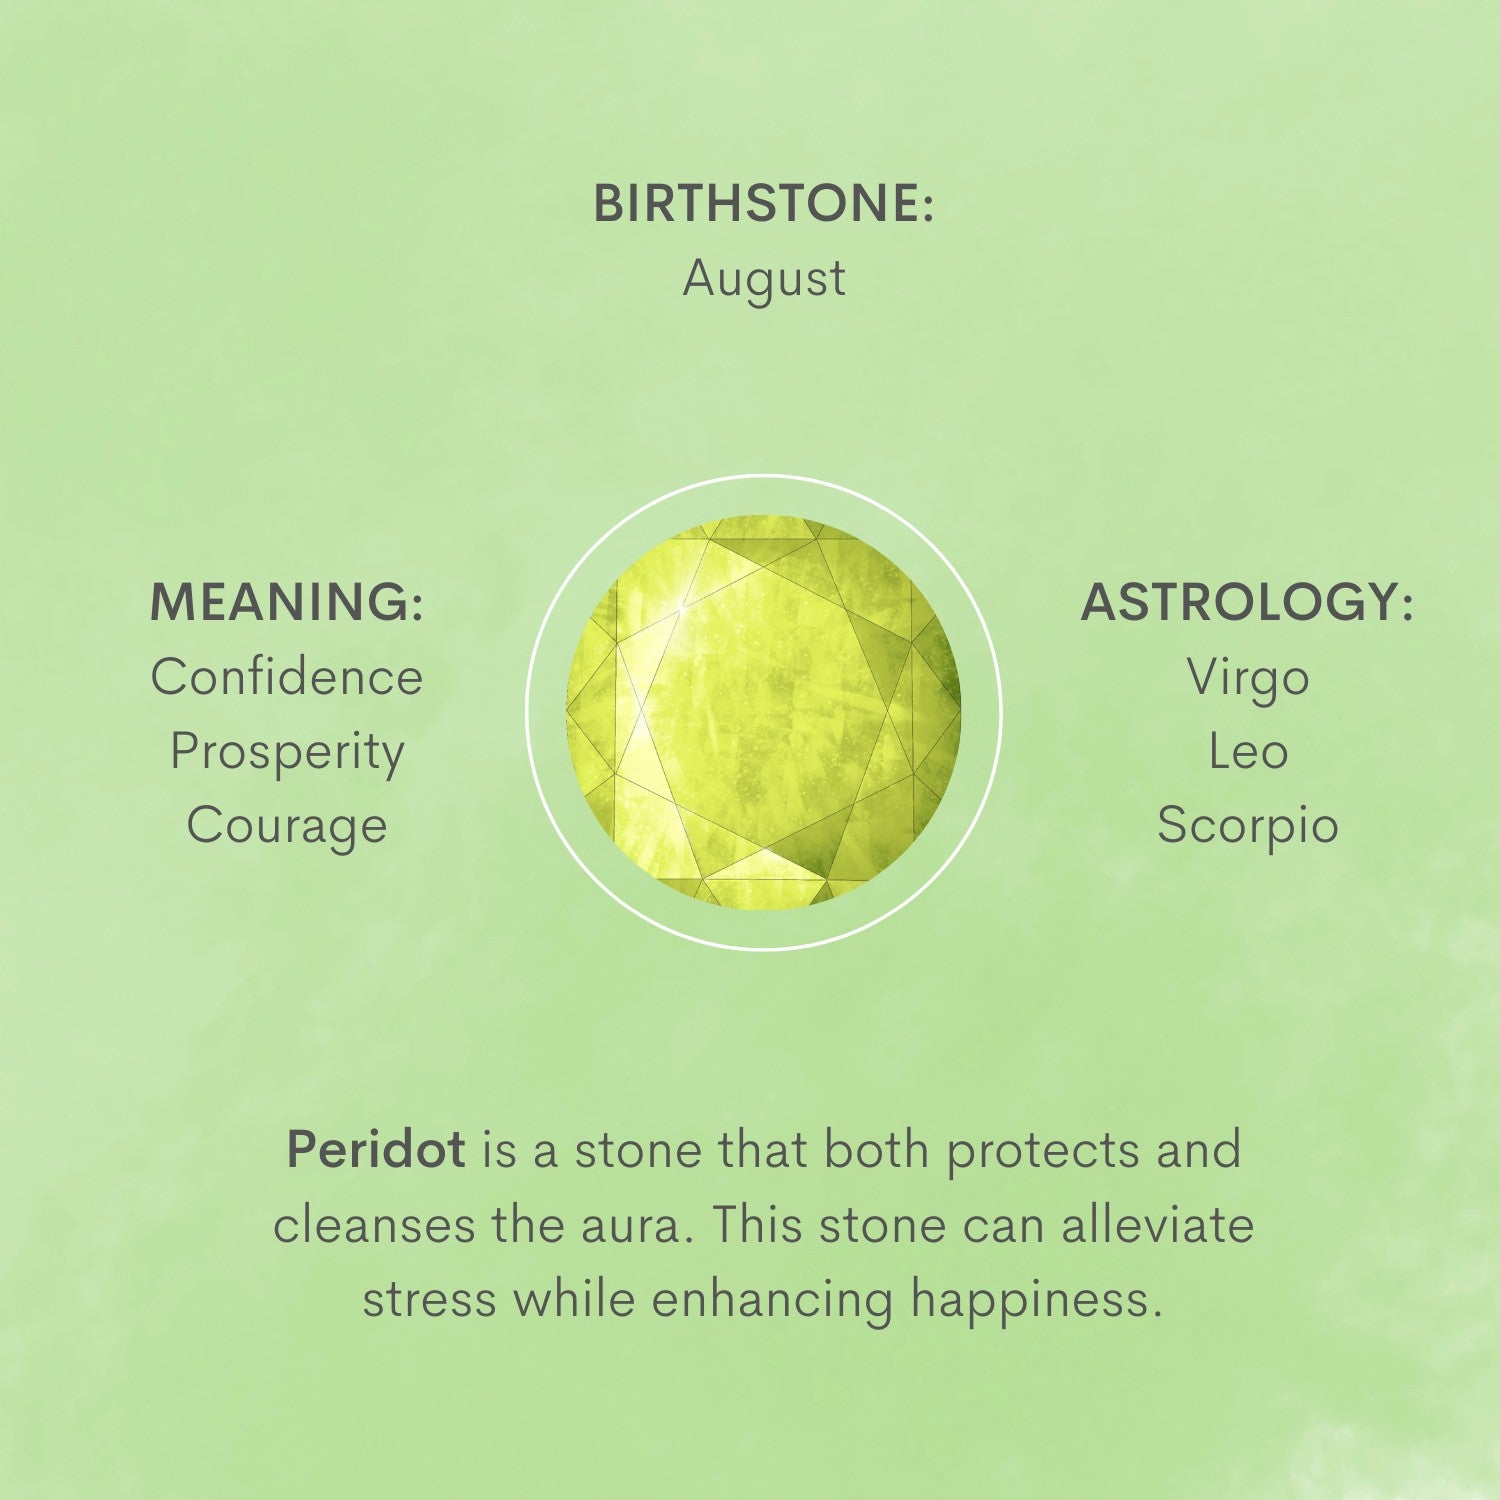 Peridot is a stone that both protects and cleanses the aura. This stone can alleviate stress and anger while enhancing confidence and happiness.